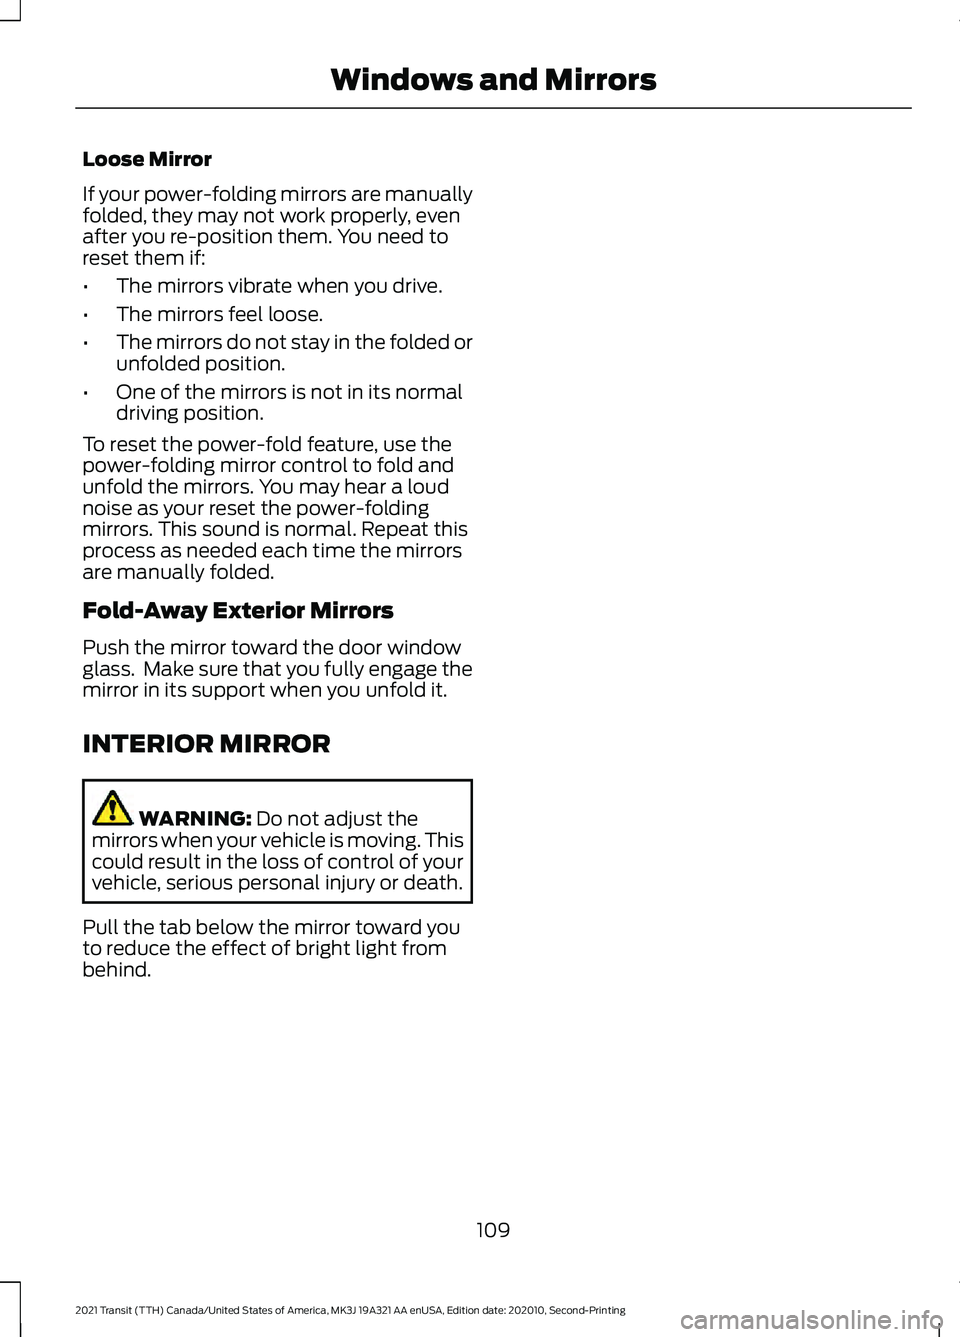 FORD TRANSIT 2021 Service Manual Loose Mirror
If your power-folding mirrors are manually
folded, they may not work properly, even
after you re-position them. You need to
reset them if:
•
The mirrors vibrate when you drive.
• The 